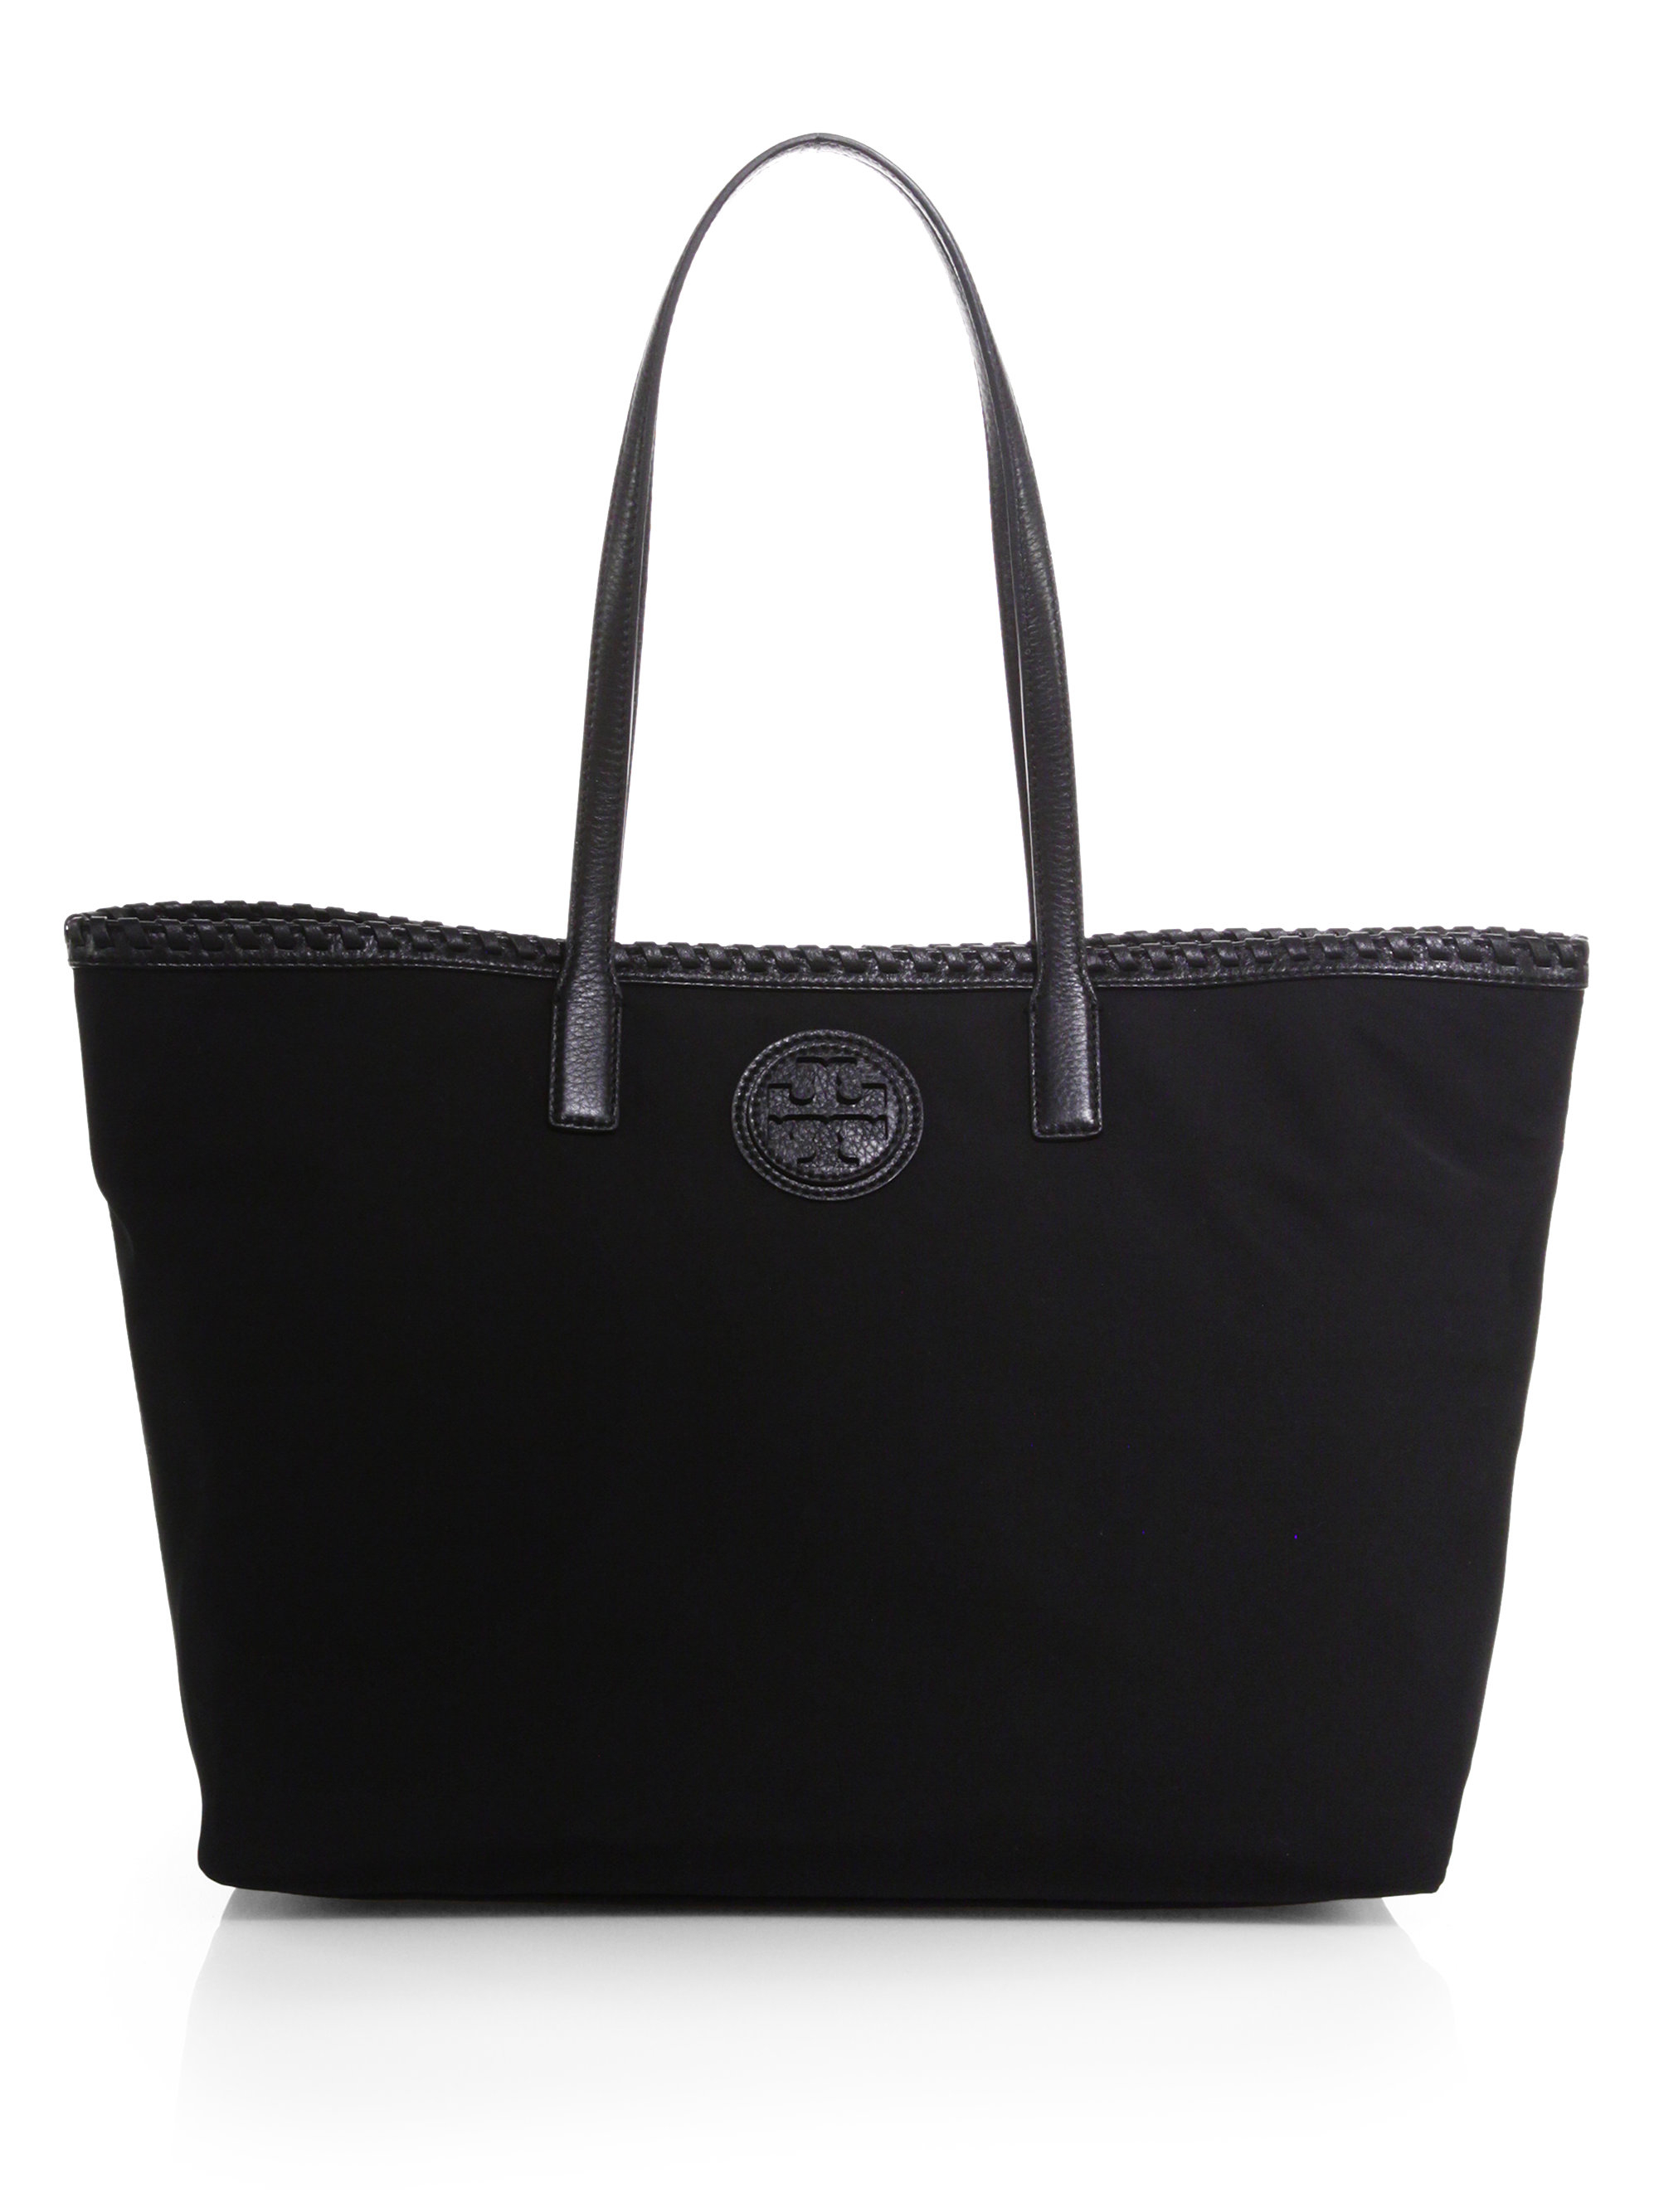 Tory Burch East West Tote La France, SAVE 44% - thecocktail-clinic.com